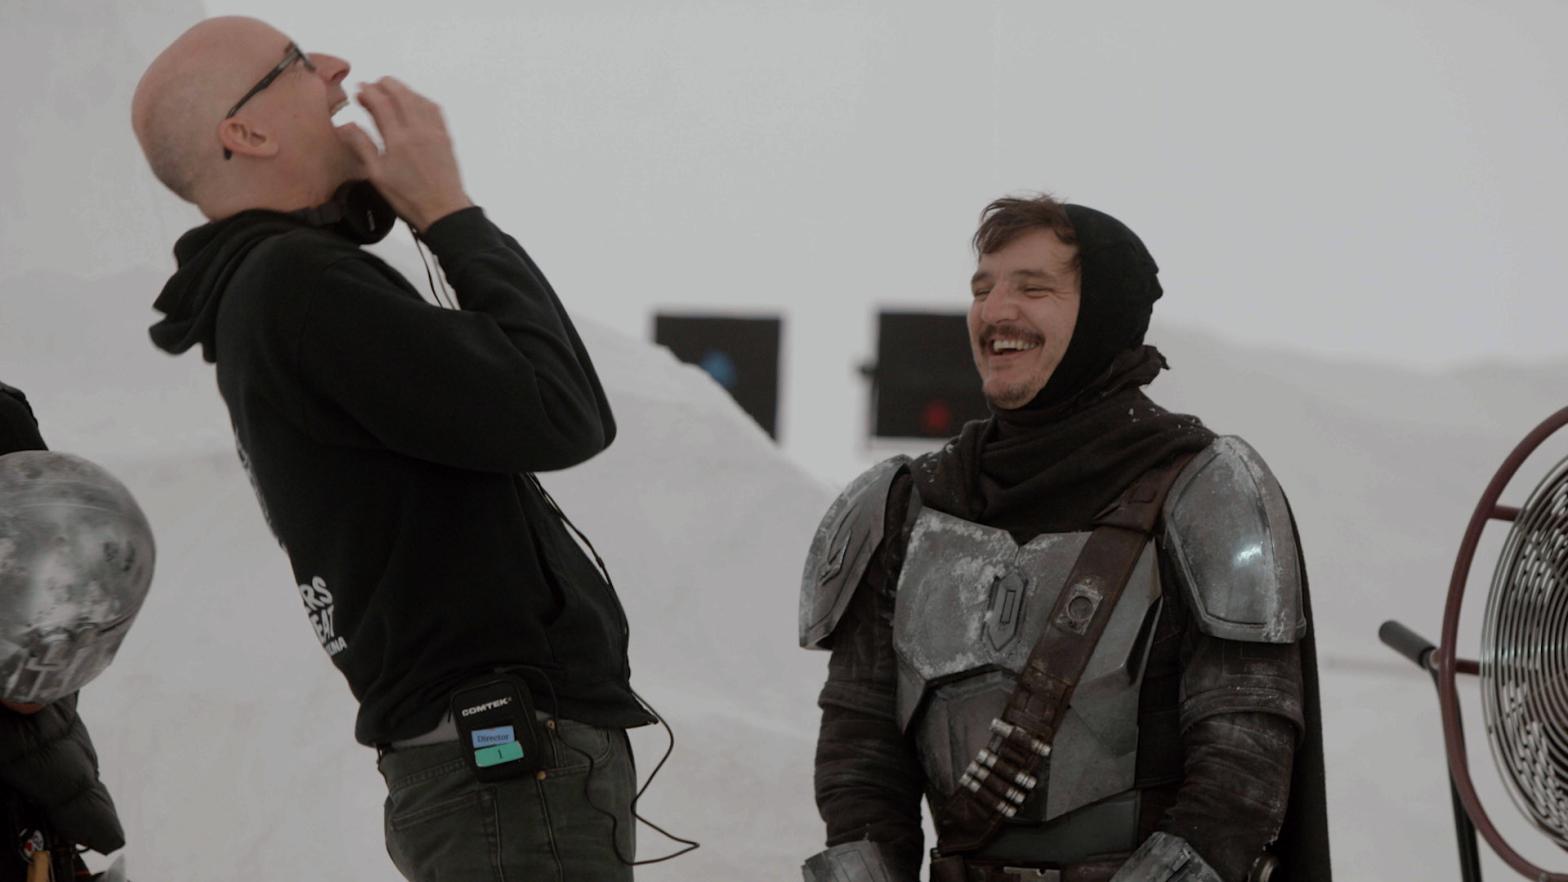 Director Peyton Reed and star Pedro Pascal share a moment inside a powerful filmmaking tool on the set of The Mandalorian. (Photo: Lucasfilm)